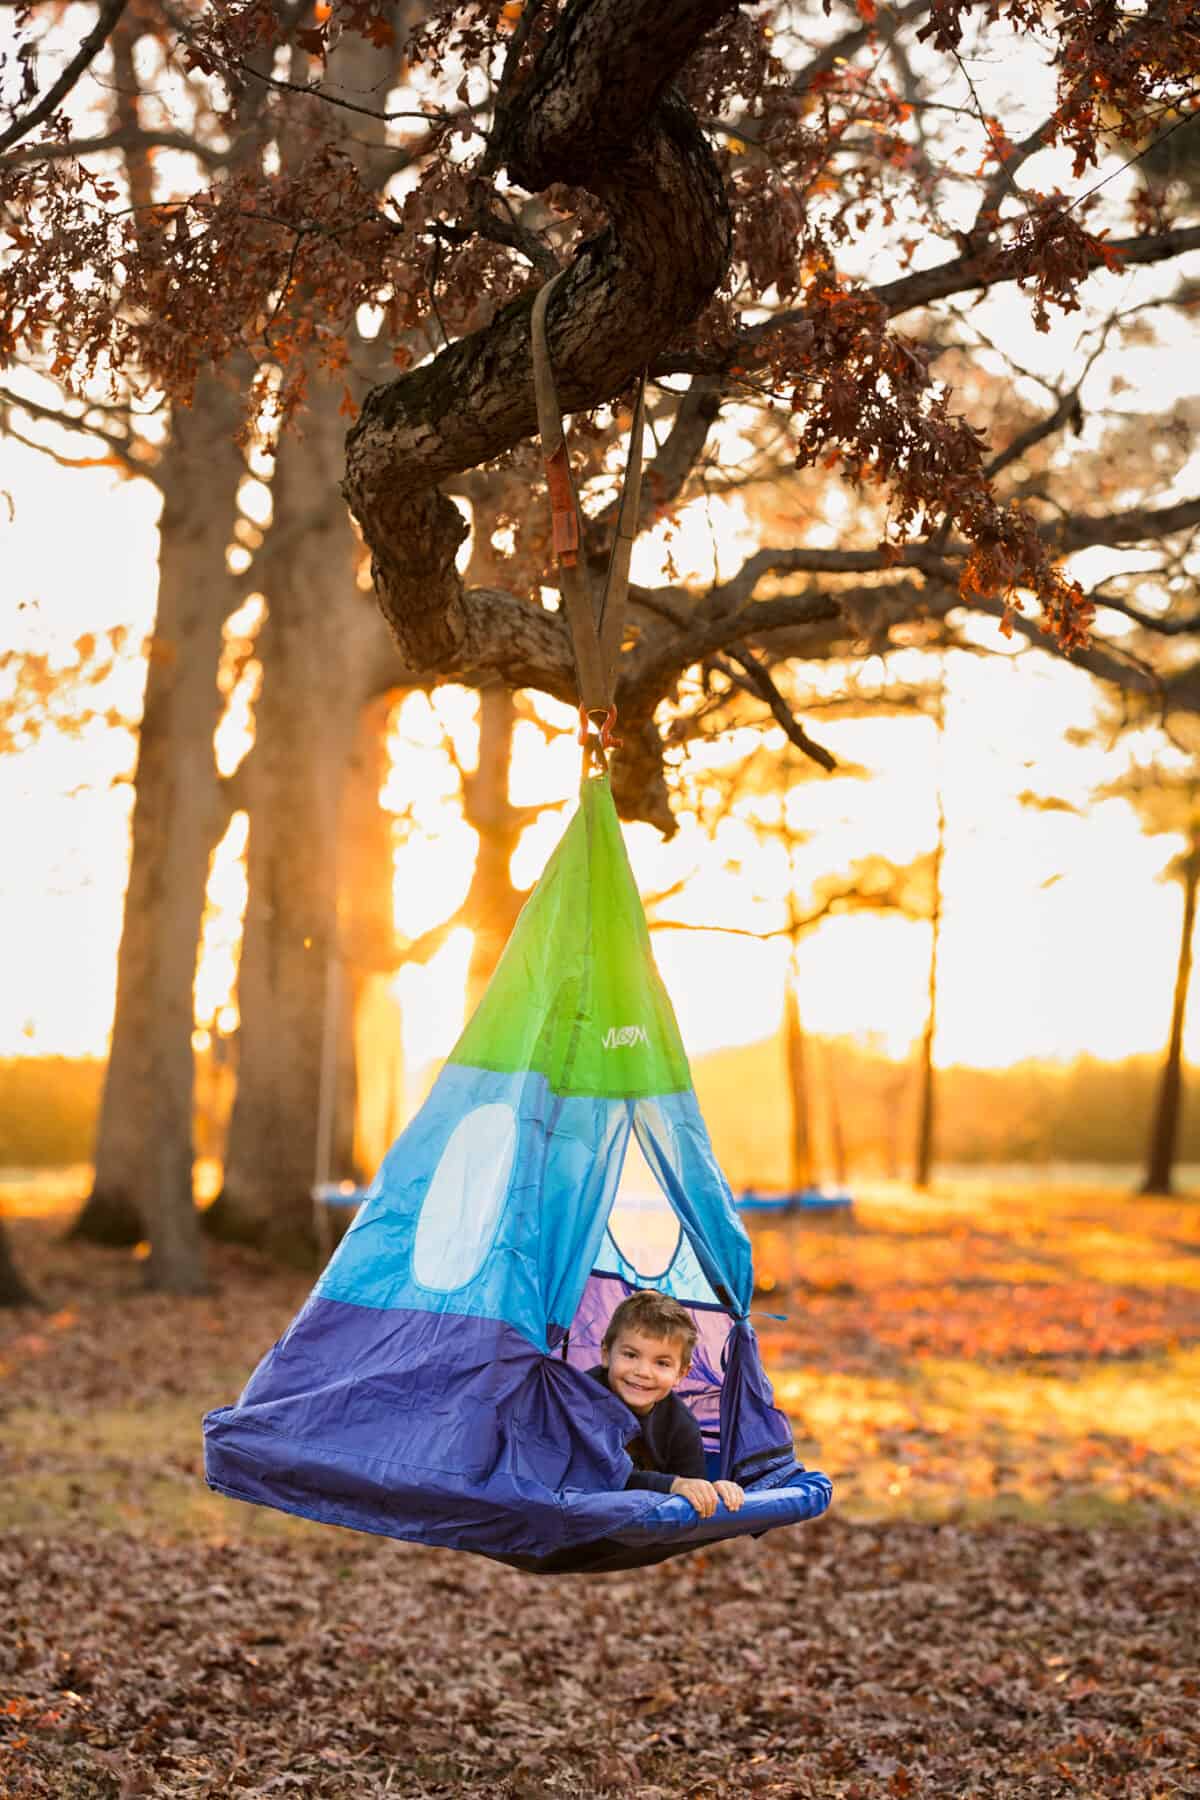 Child looking out of a hanging tent swing